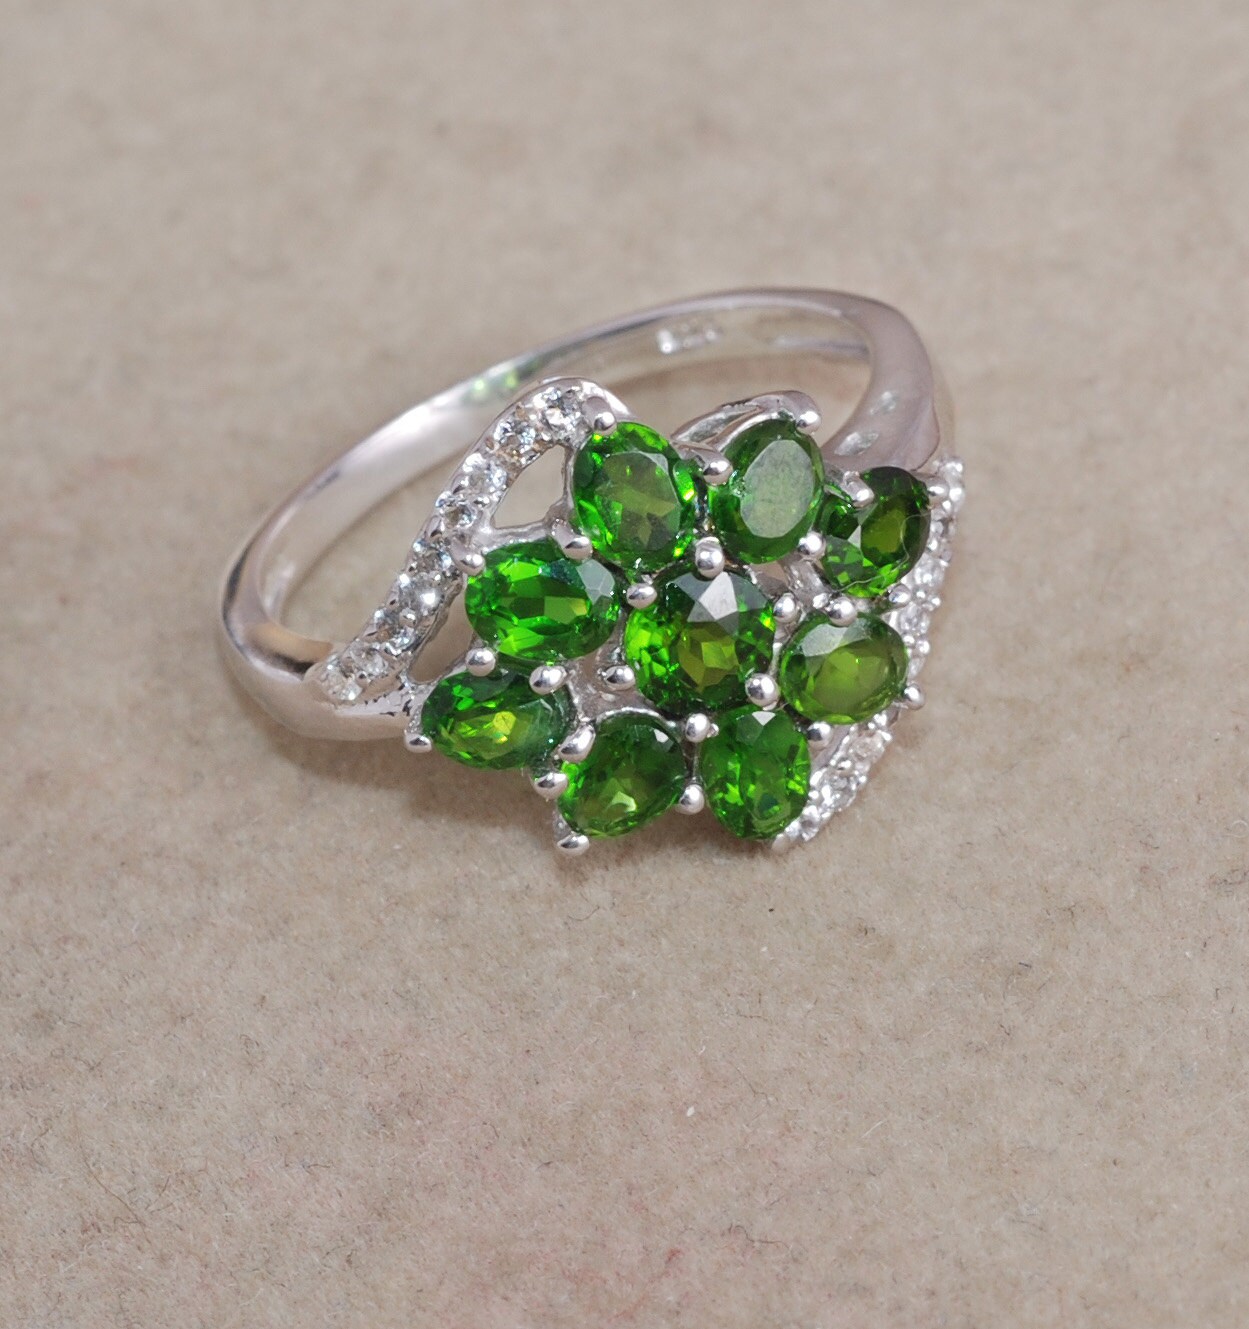 Russian Chrome diopside White topaz ring by silverjewelry2015